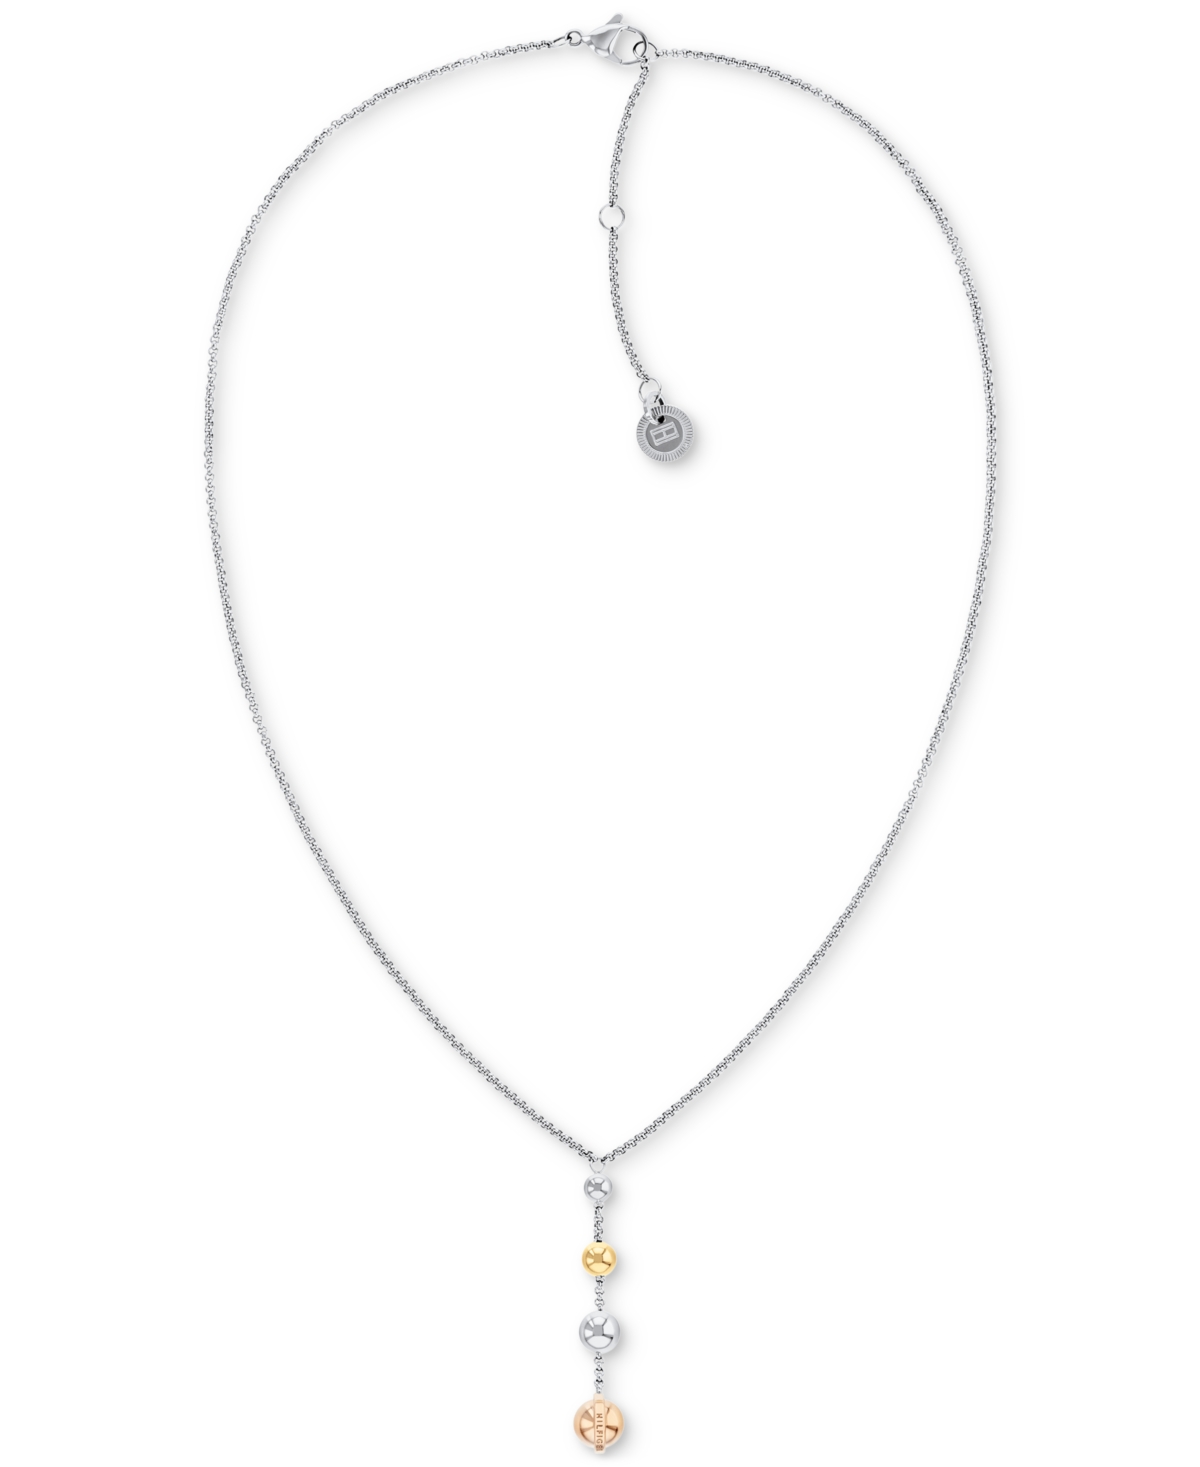 Two-Tone Stainless Steel Metallic Orb Lariat Necklace, 17" + 2" extender - Multi